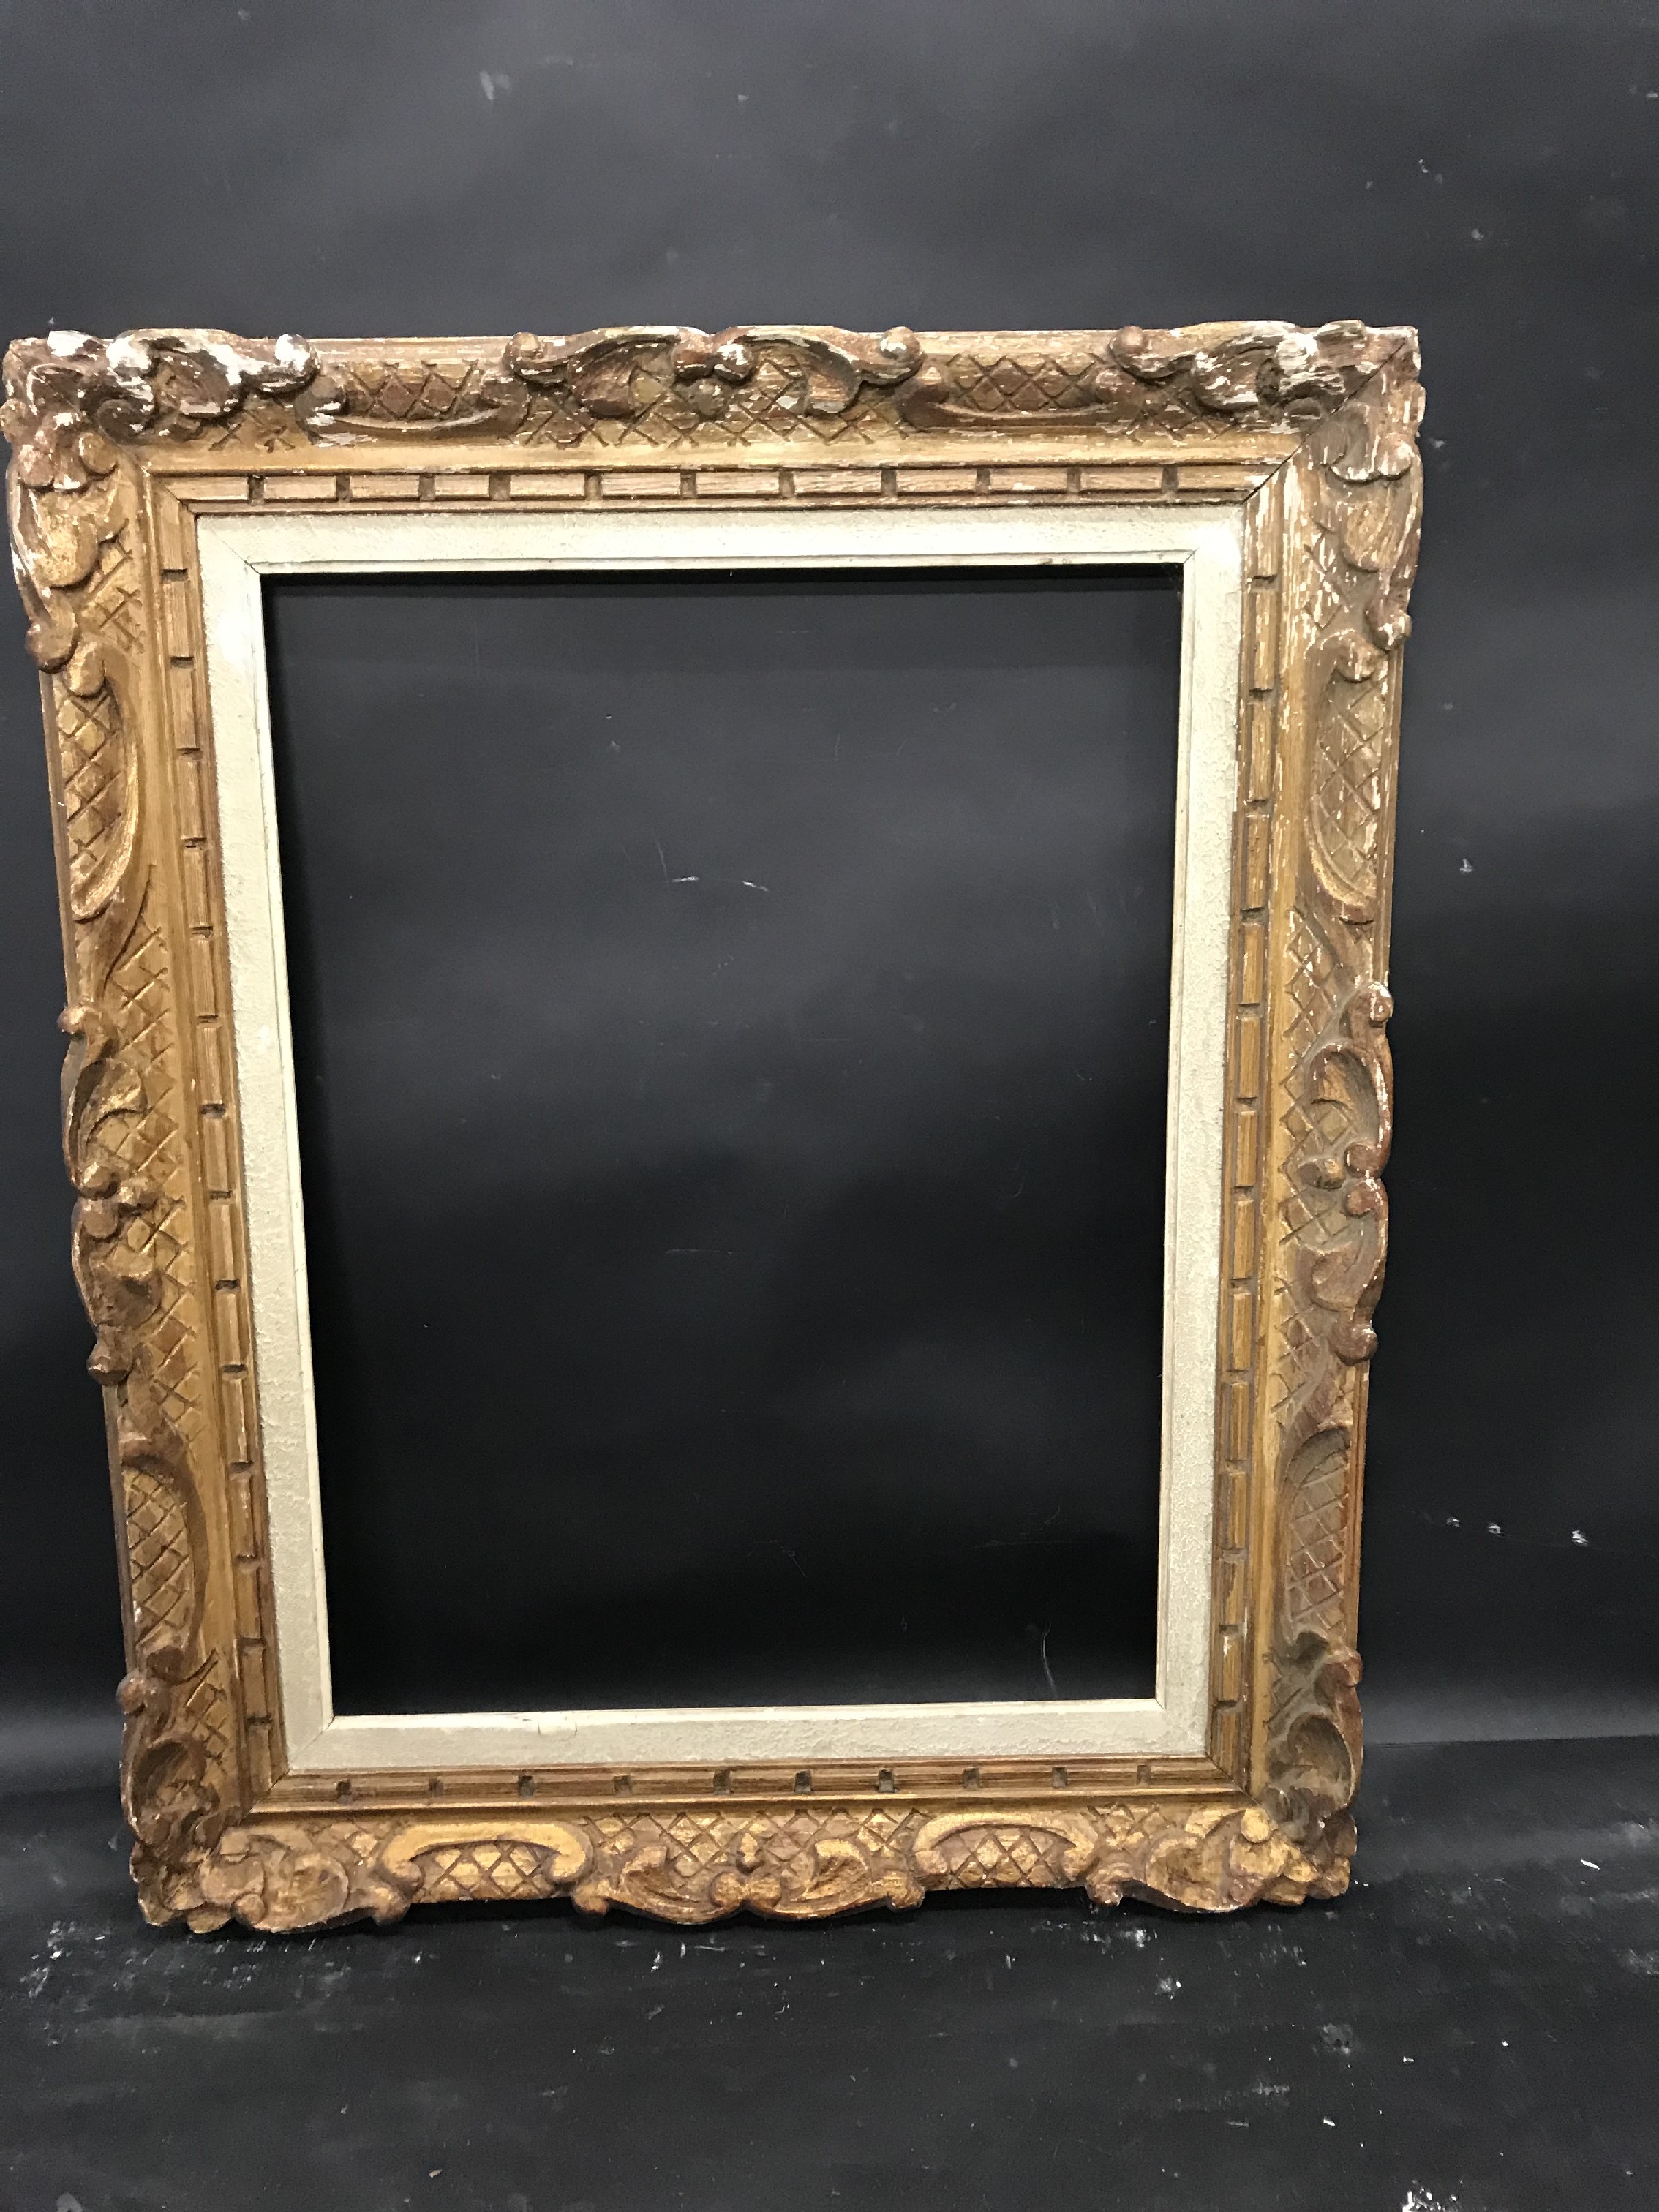 20th Century European School. A Carved Giltwood Frame, with a white inner slip, 24" x 18" (rebate). - Image 2 of 3